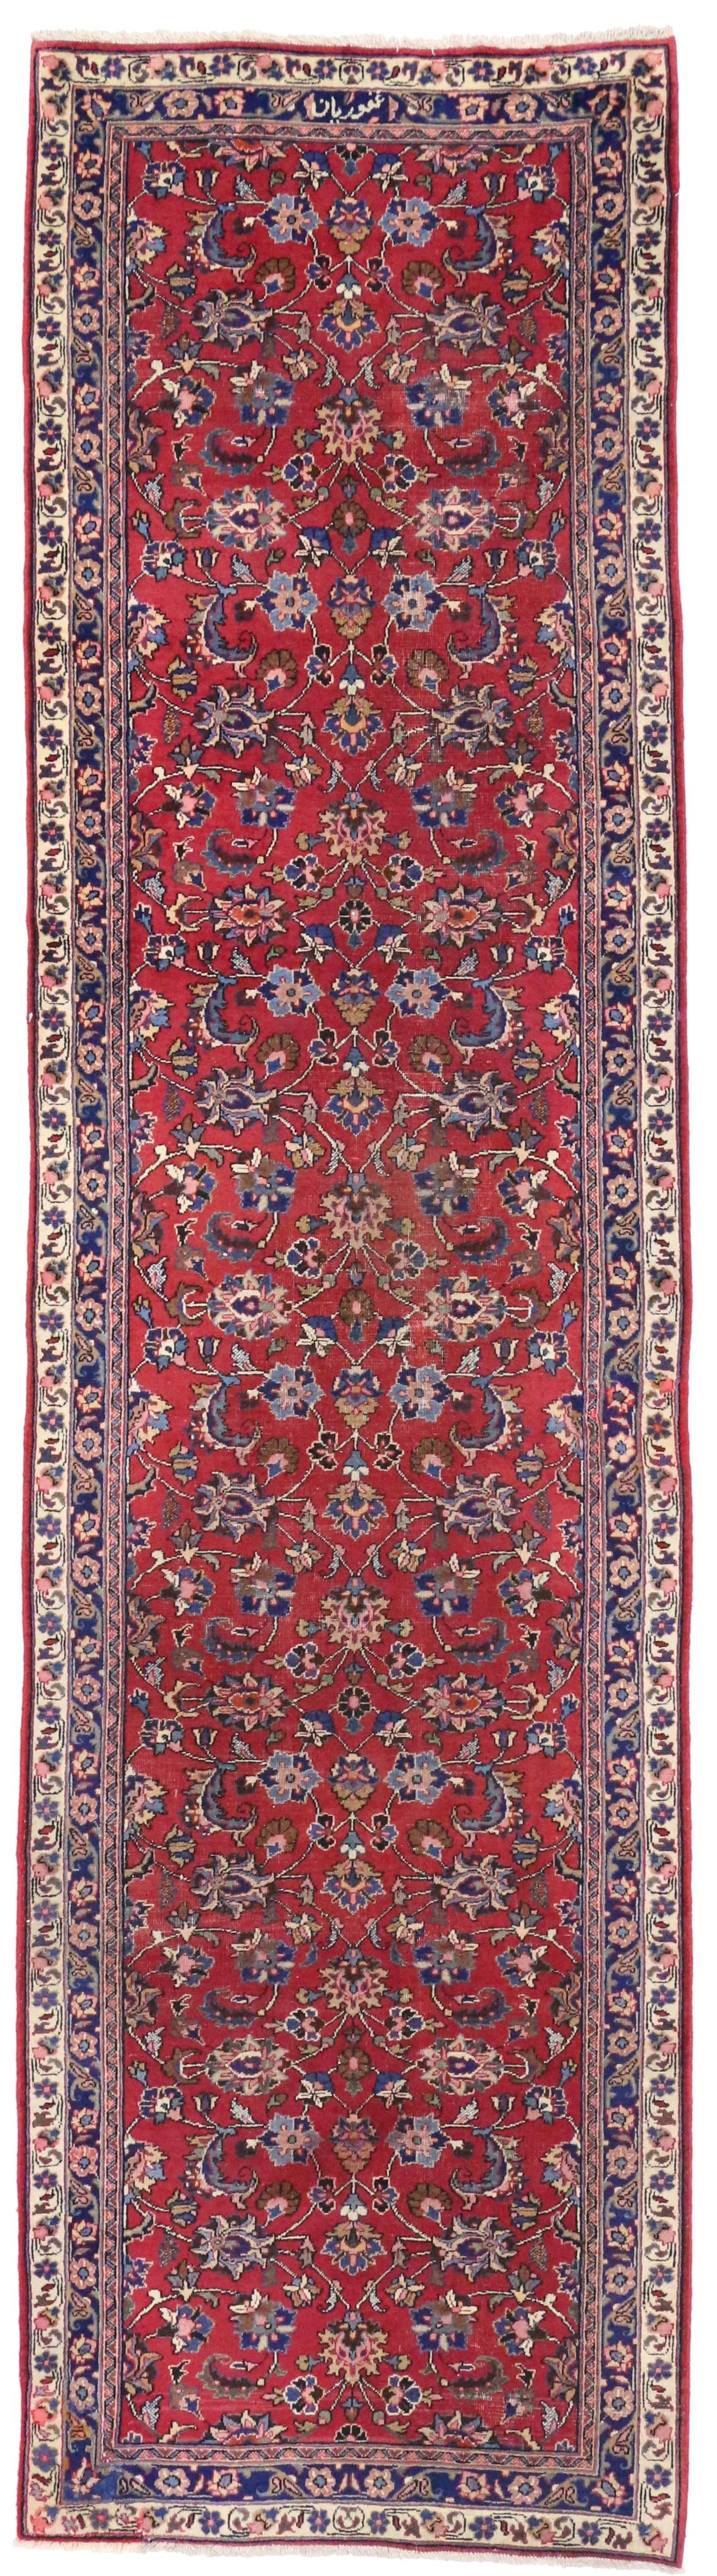 Vintage Persian Mashhad Runner with Old World Parisian Style For Sale 3